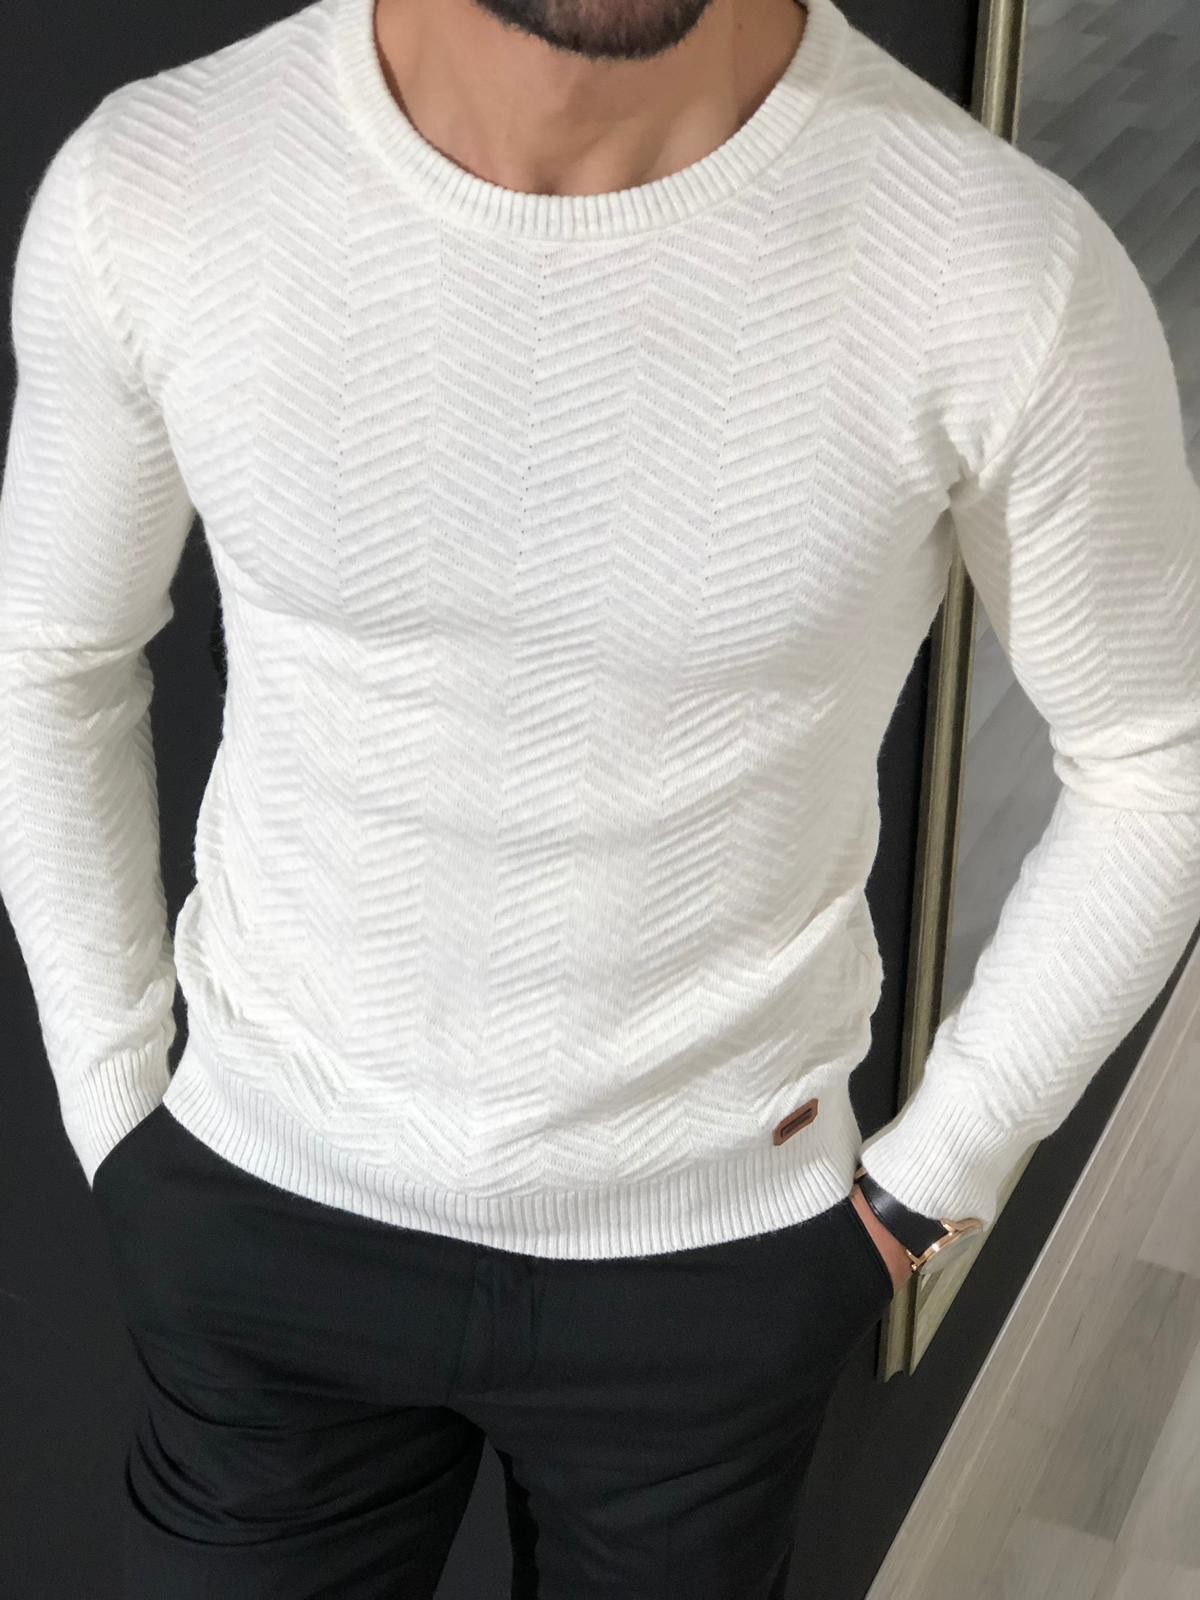 Buy Ecru Slim Fit Patterned Sweater by Gentwith.com with Free Shipping